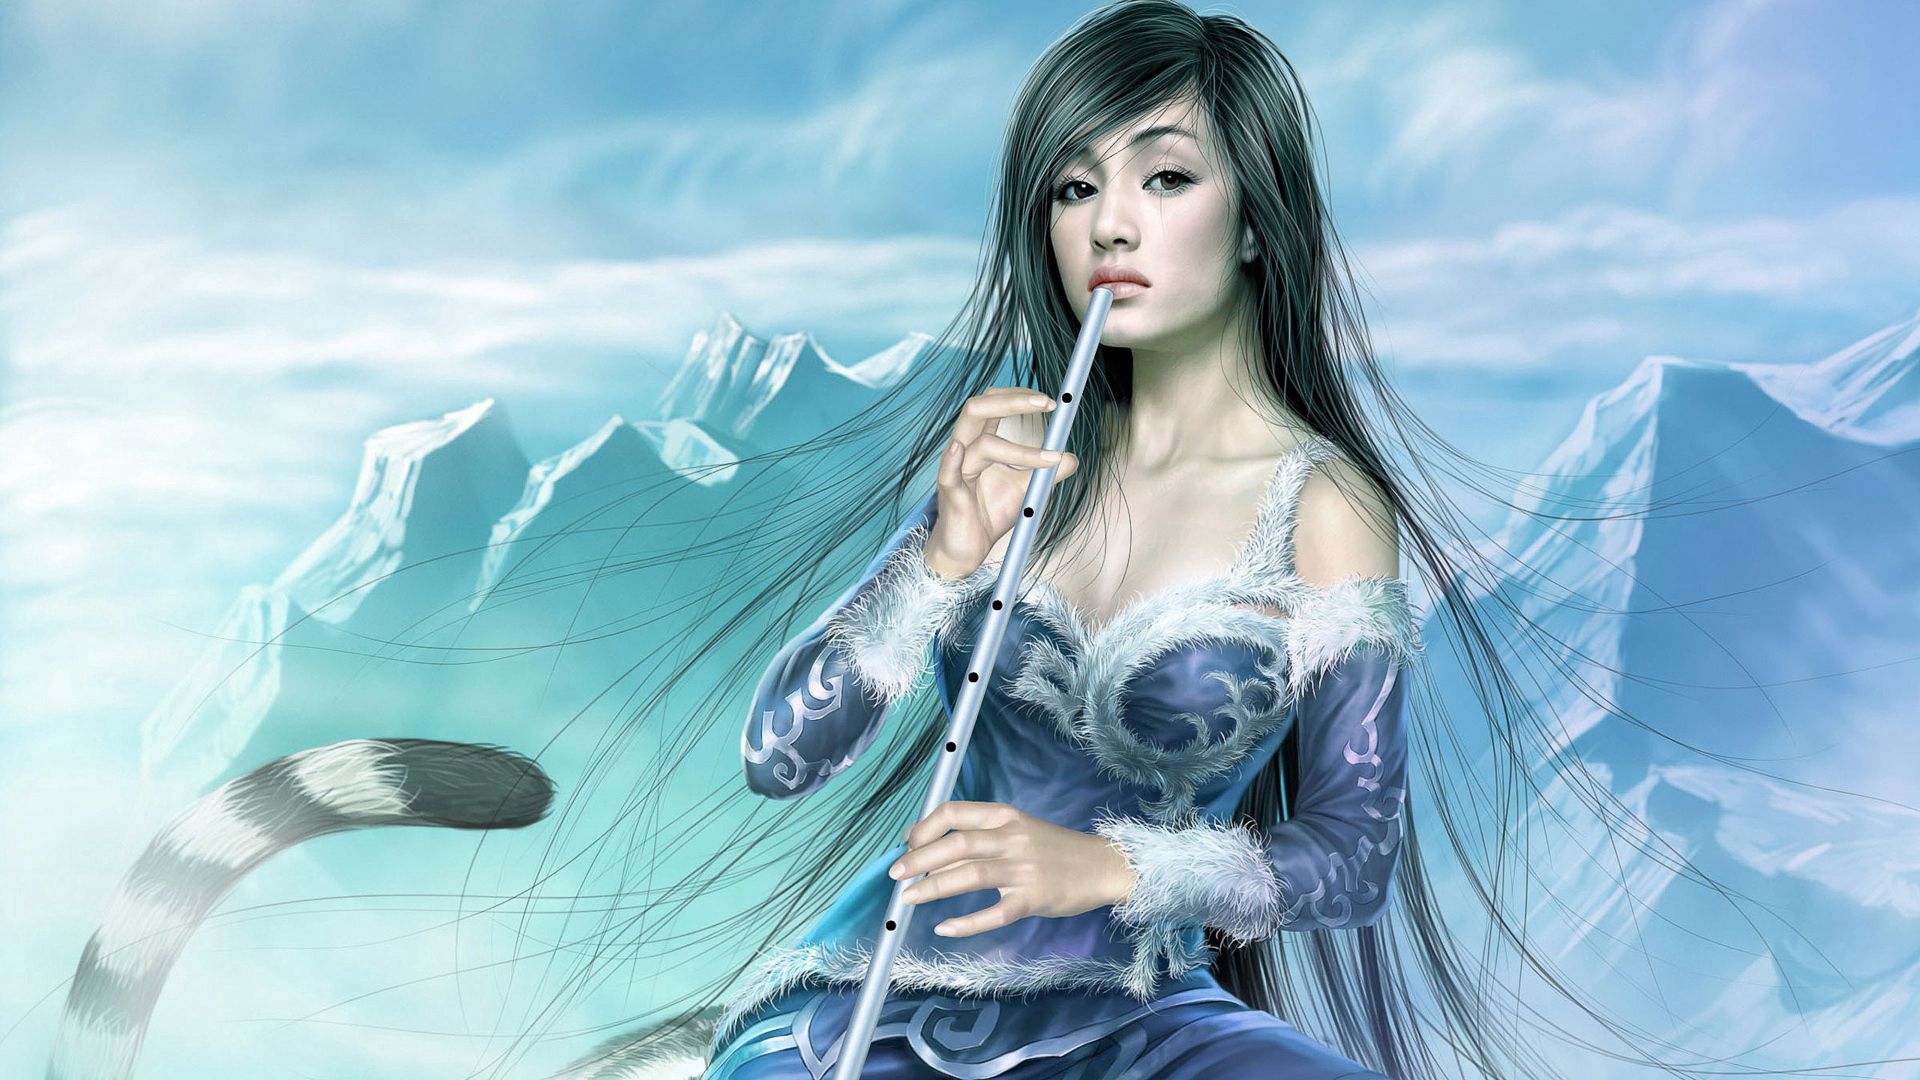 130080 Screensavers and Wallpapers Warrior for phone. Download fantasy, mountains, girl, warrior, tail pictures for free